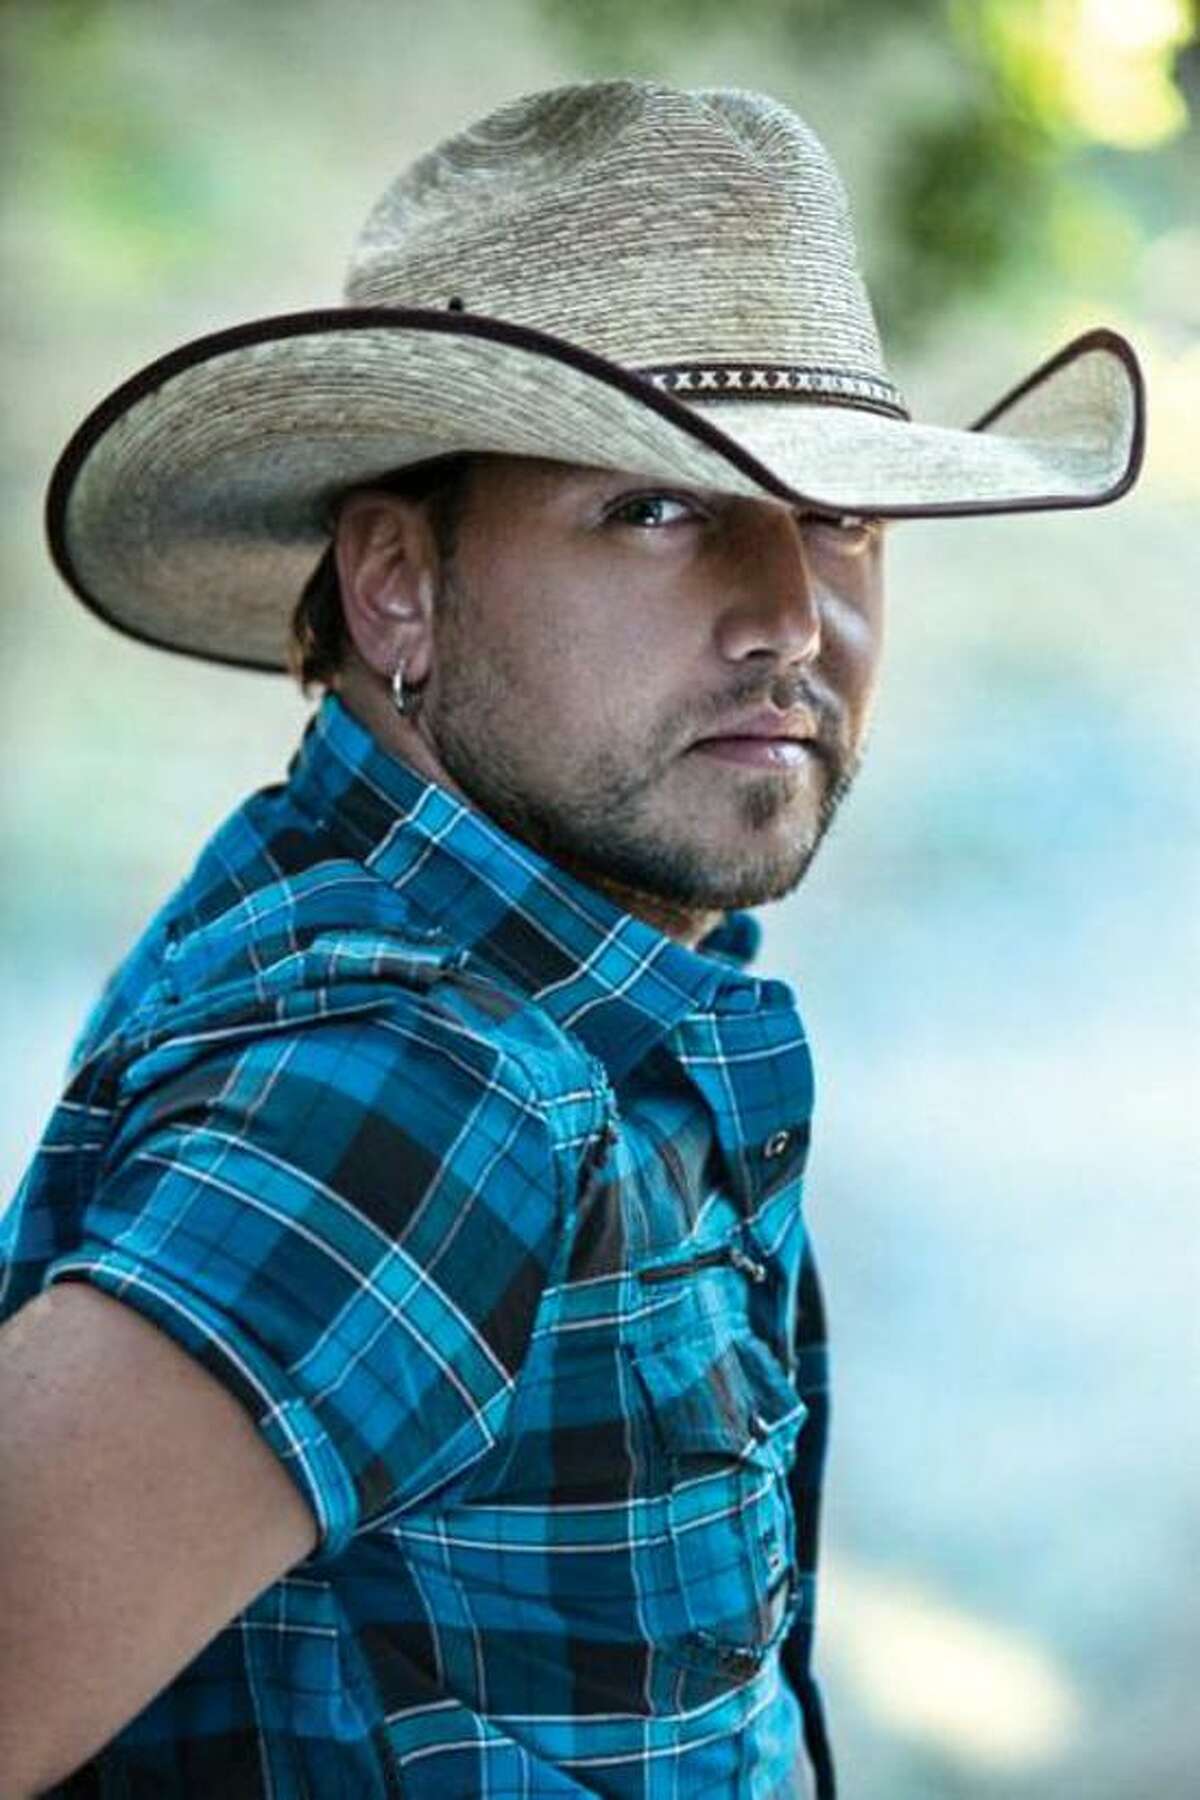 Contributed photo: Jason Aldean's My Kinda Party Tour makes a stop at the Comcast Theatre tonight. Music starts at 7:30 p.m. with opening acts Rachel Farley and Luke Brian. Tickets are available at livenation.com, ticketmaster.com or 800-745-3000.